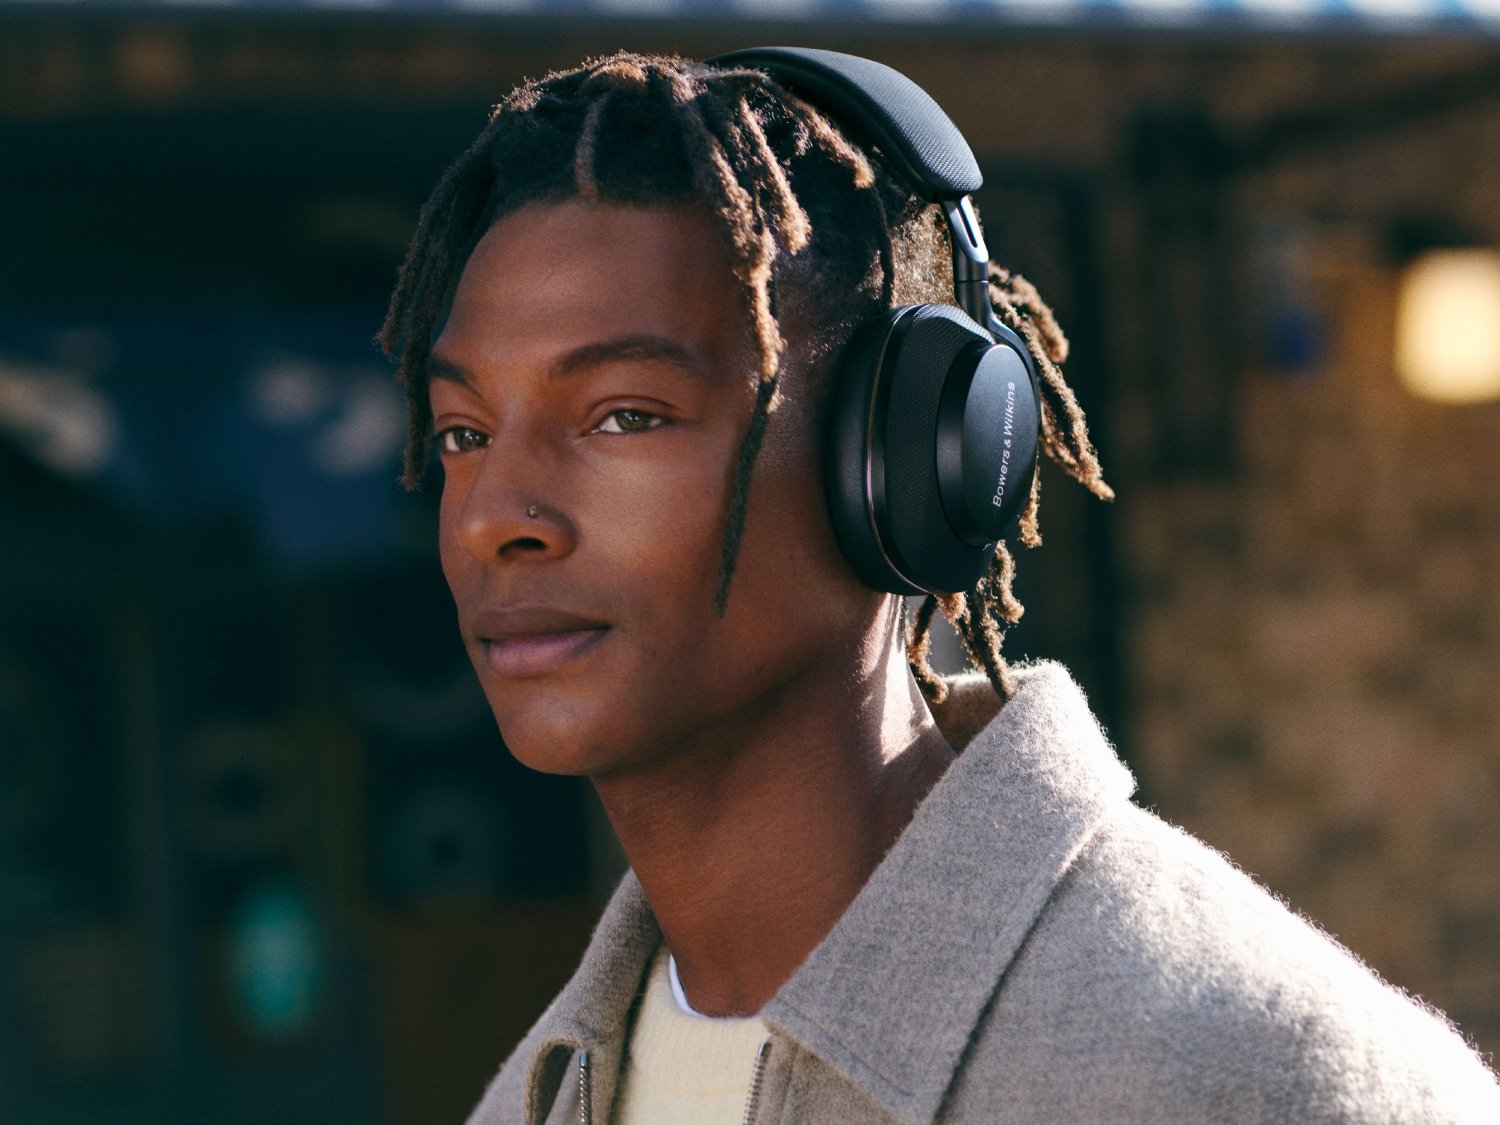  Bowers & Wilkins Px7 S2e Over-Ear Headphones (2023 Model) -  Enhanced Noise Cancellation & Transparency Mode, Six Mics, Bowers & Wilkins  Music App Compatible, 30-Hour Playback Time, Ocean Blue : Electronics